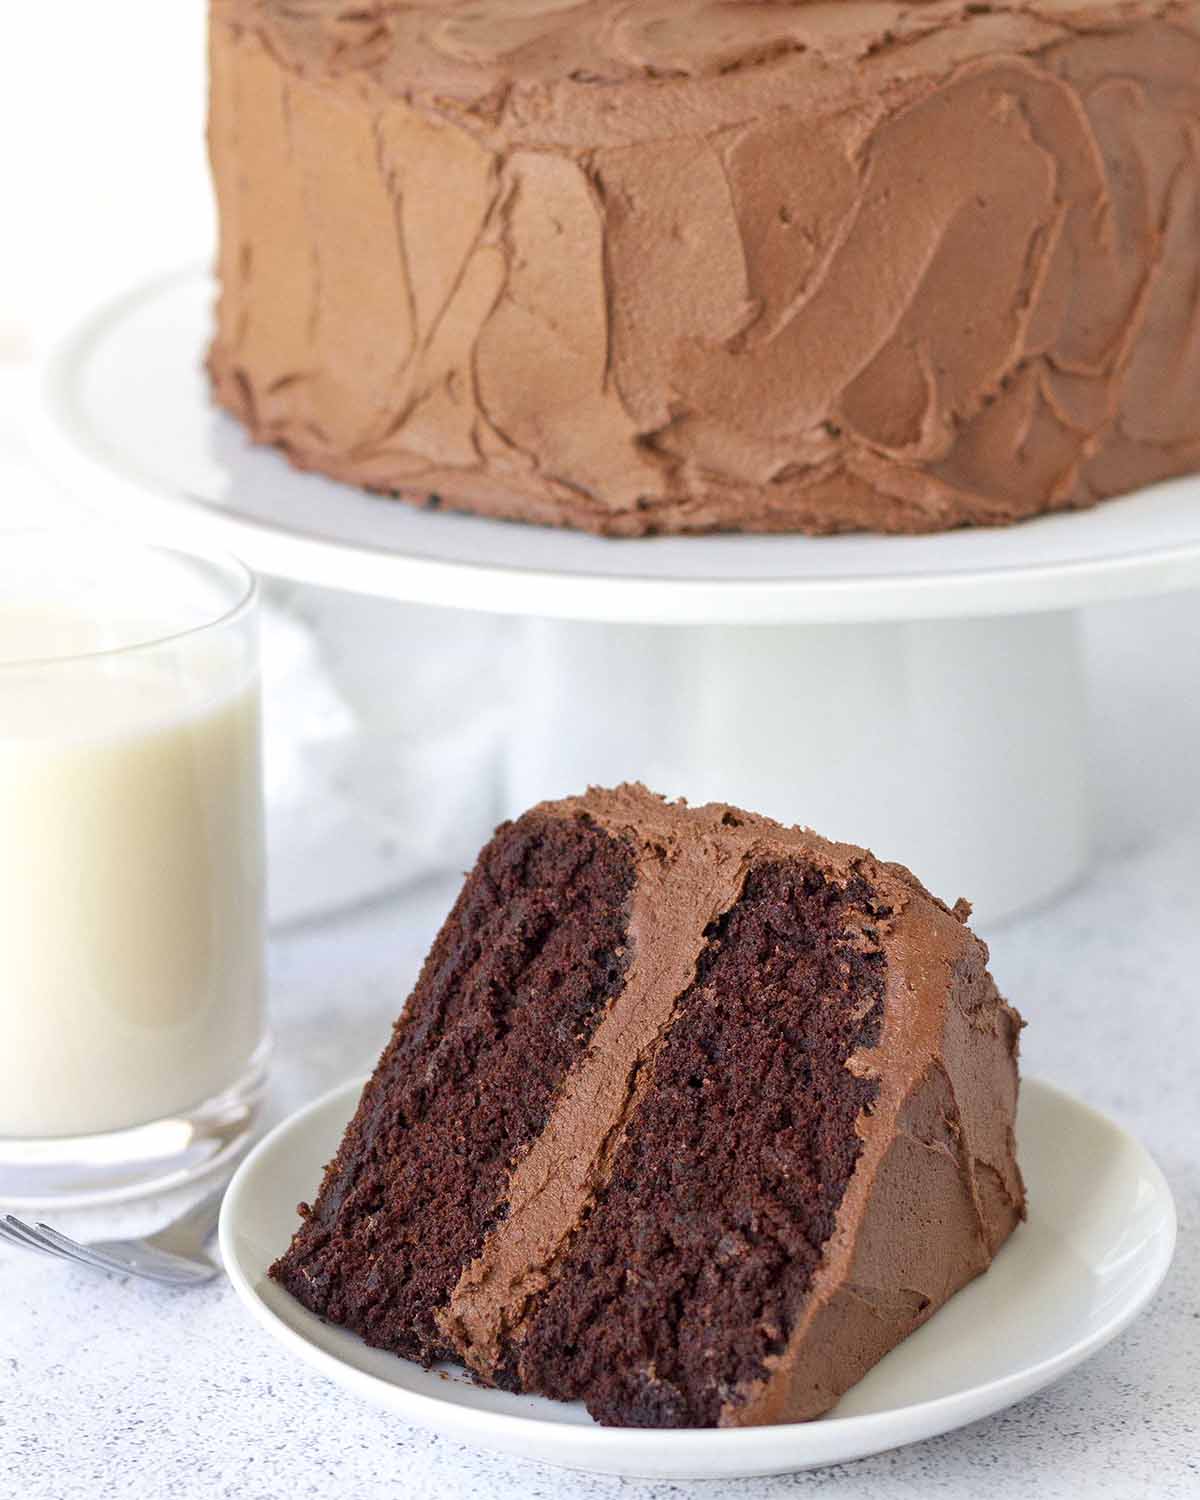 A slice of frosted chocolate layer cake on a plate, the rest of the cake sits behind the plate on a white cake stand.